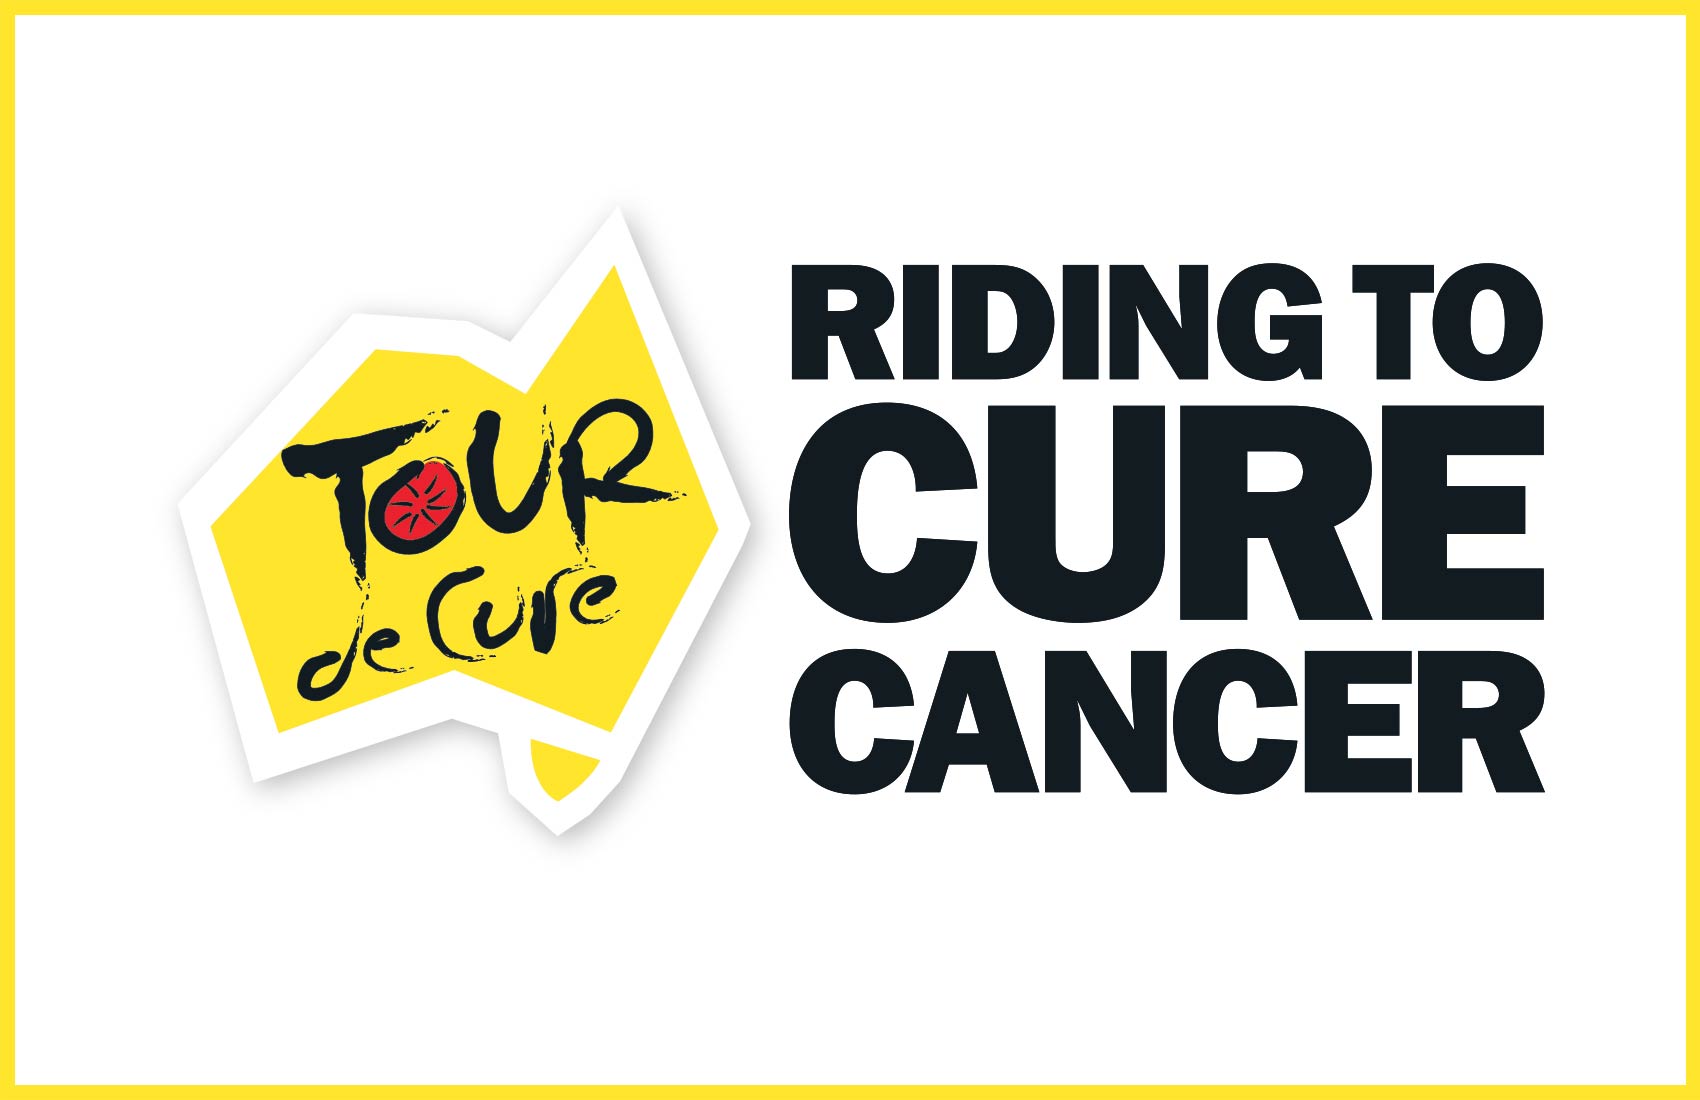 Tour de Cure Riding to Cure Cancer Southern Cross Protection